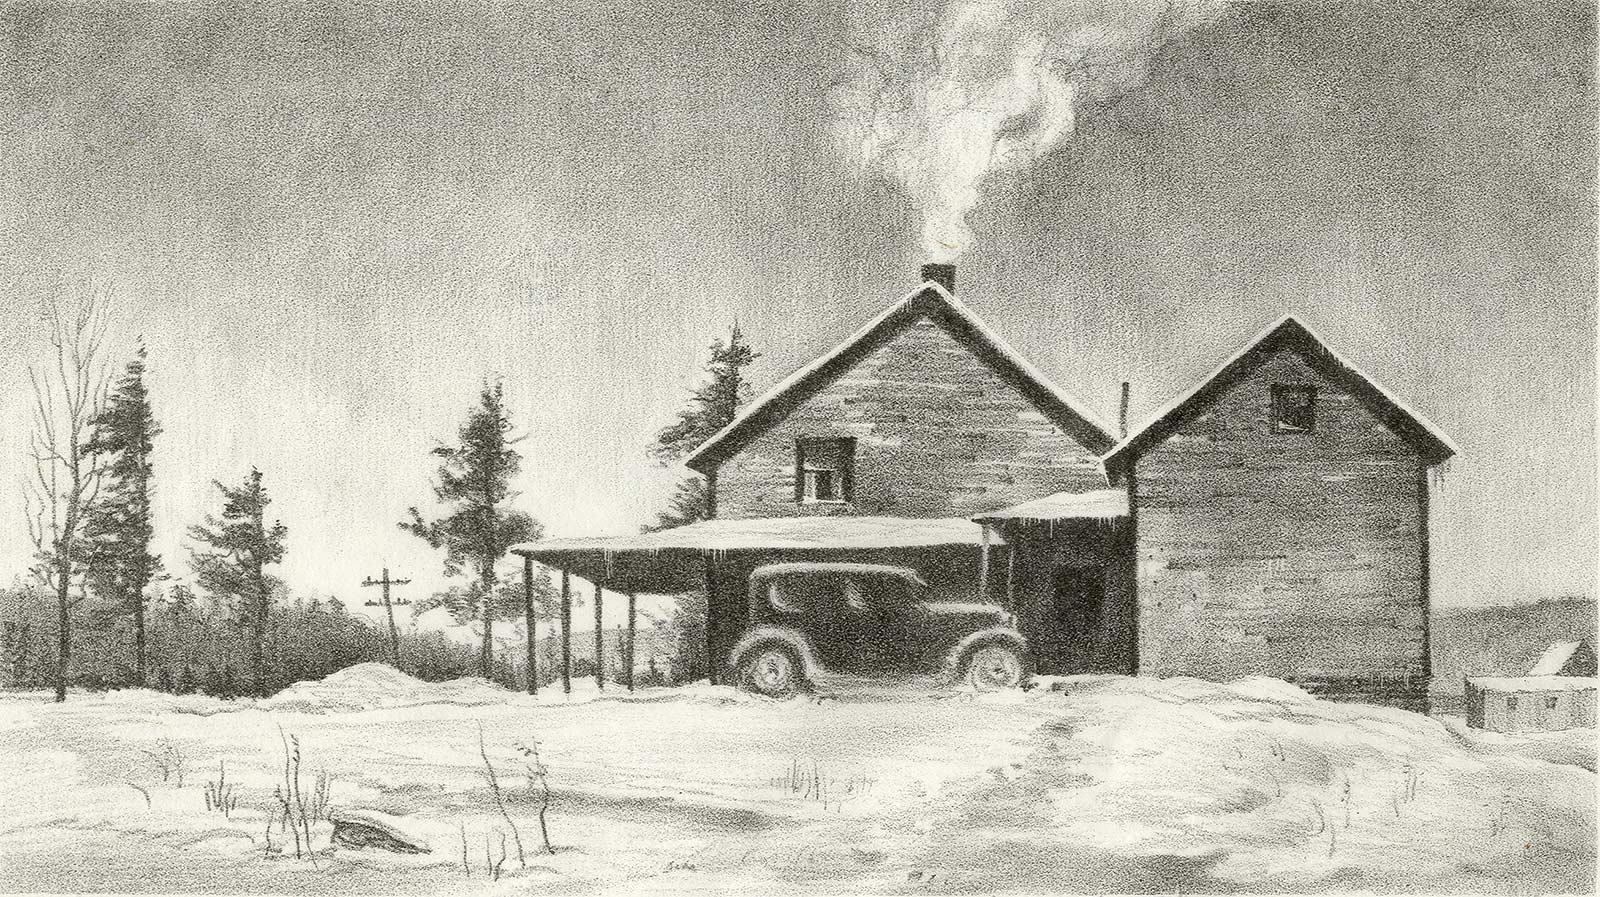 John Menihan Landscape Print - Leon's House (the warm home as a refuge on a cold day in upstate New York)